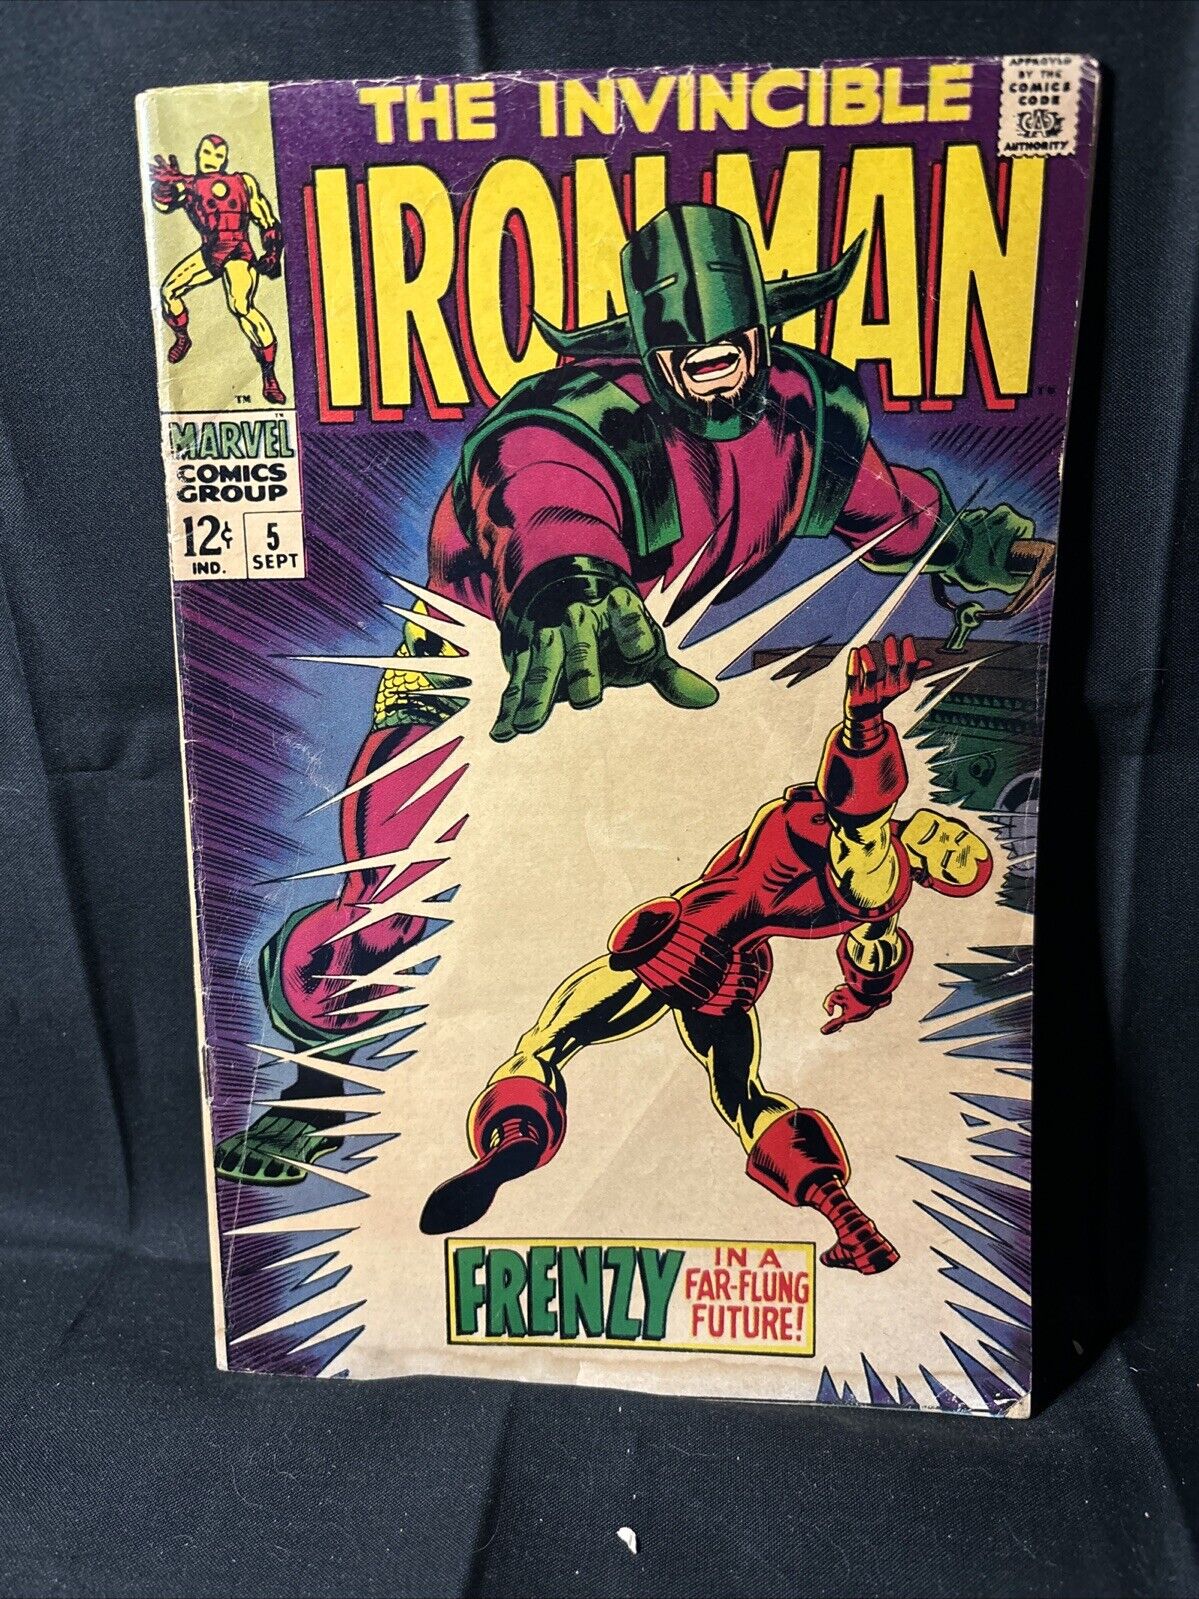 The Invincible Iron Man #5 Sep 1968, Marvel Comic, Vintage, Collectible